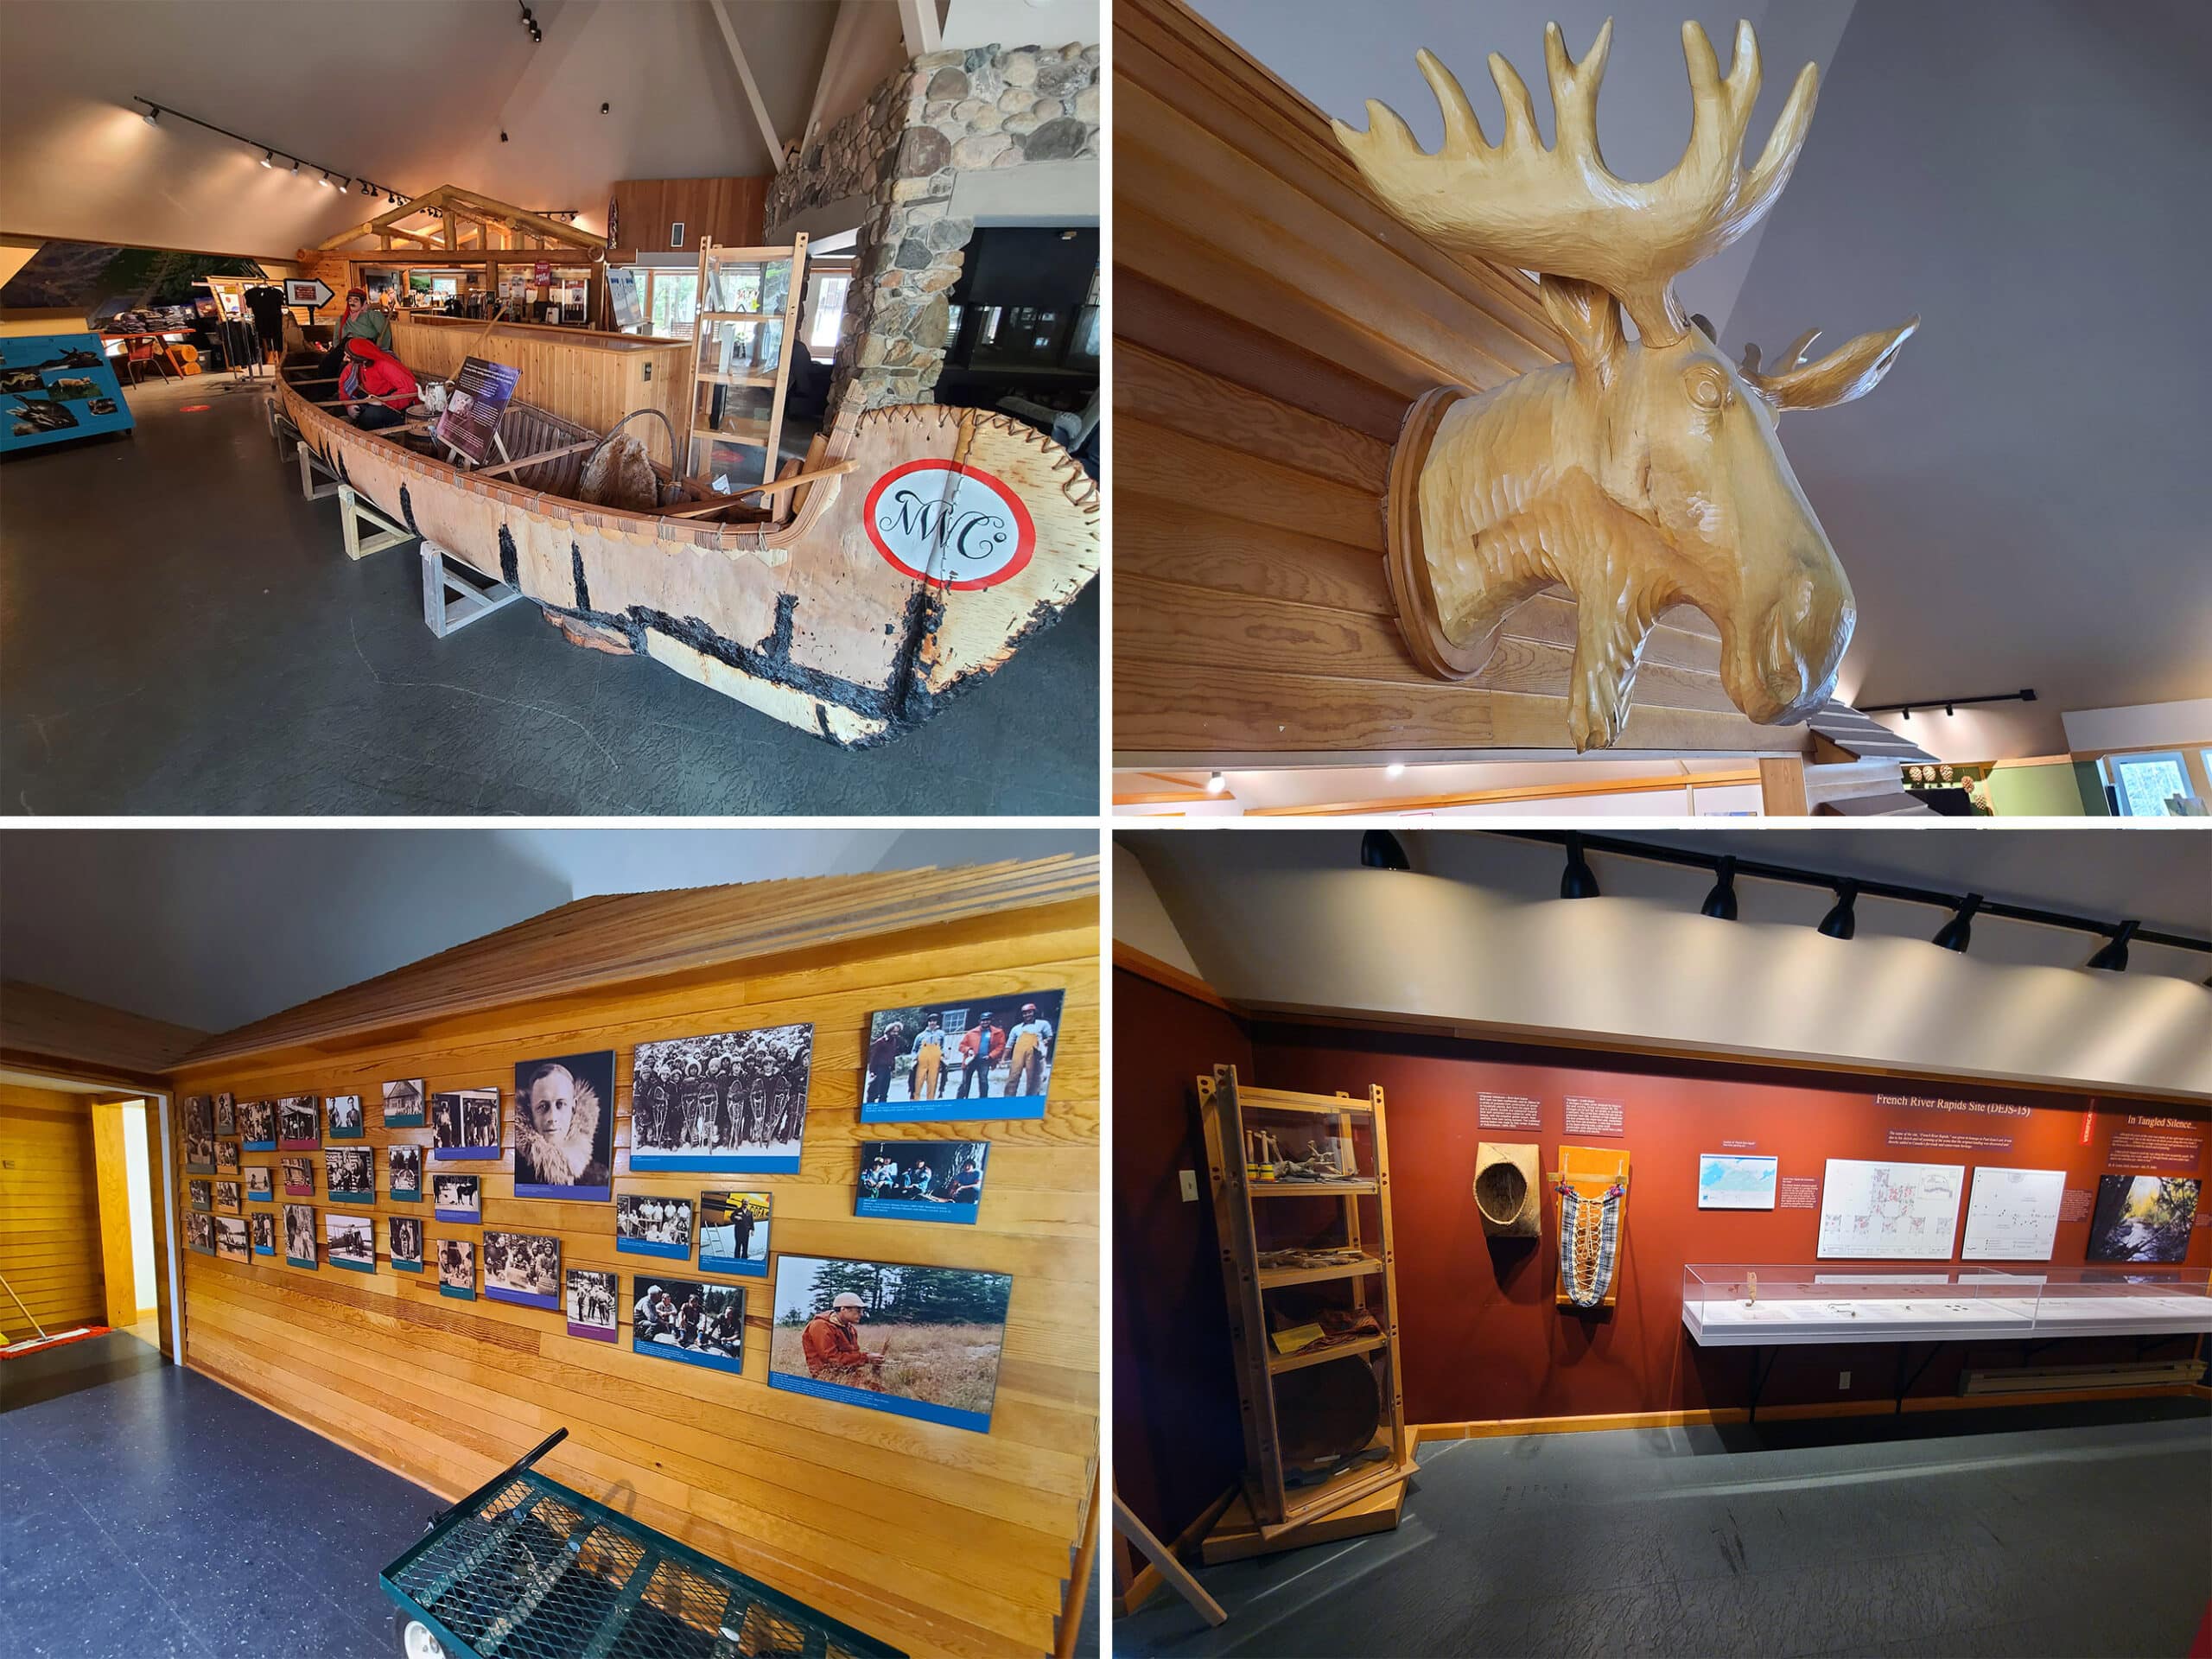 A 4 part image showing some of the displays inside the Quetico visitor centre.